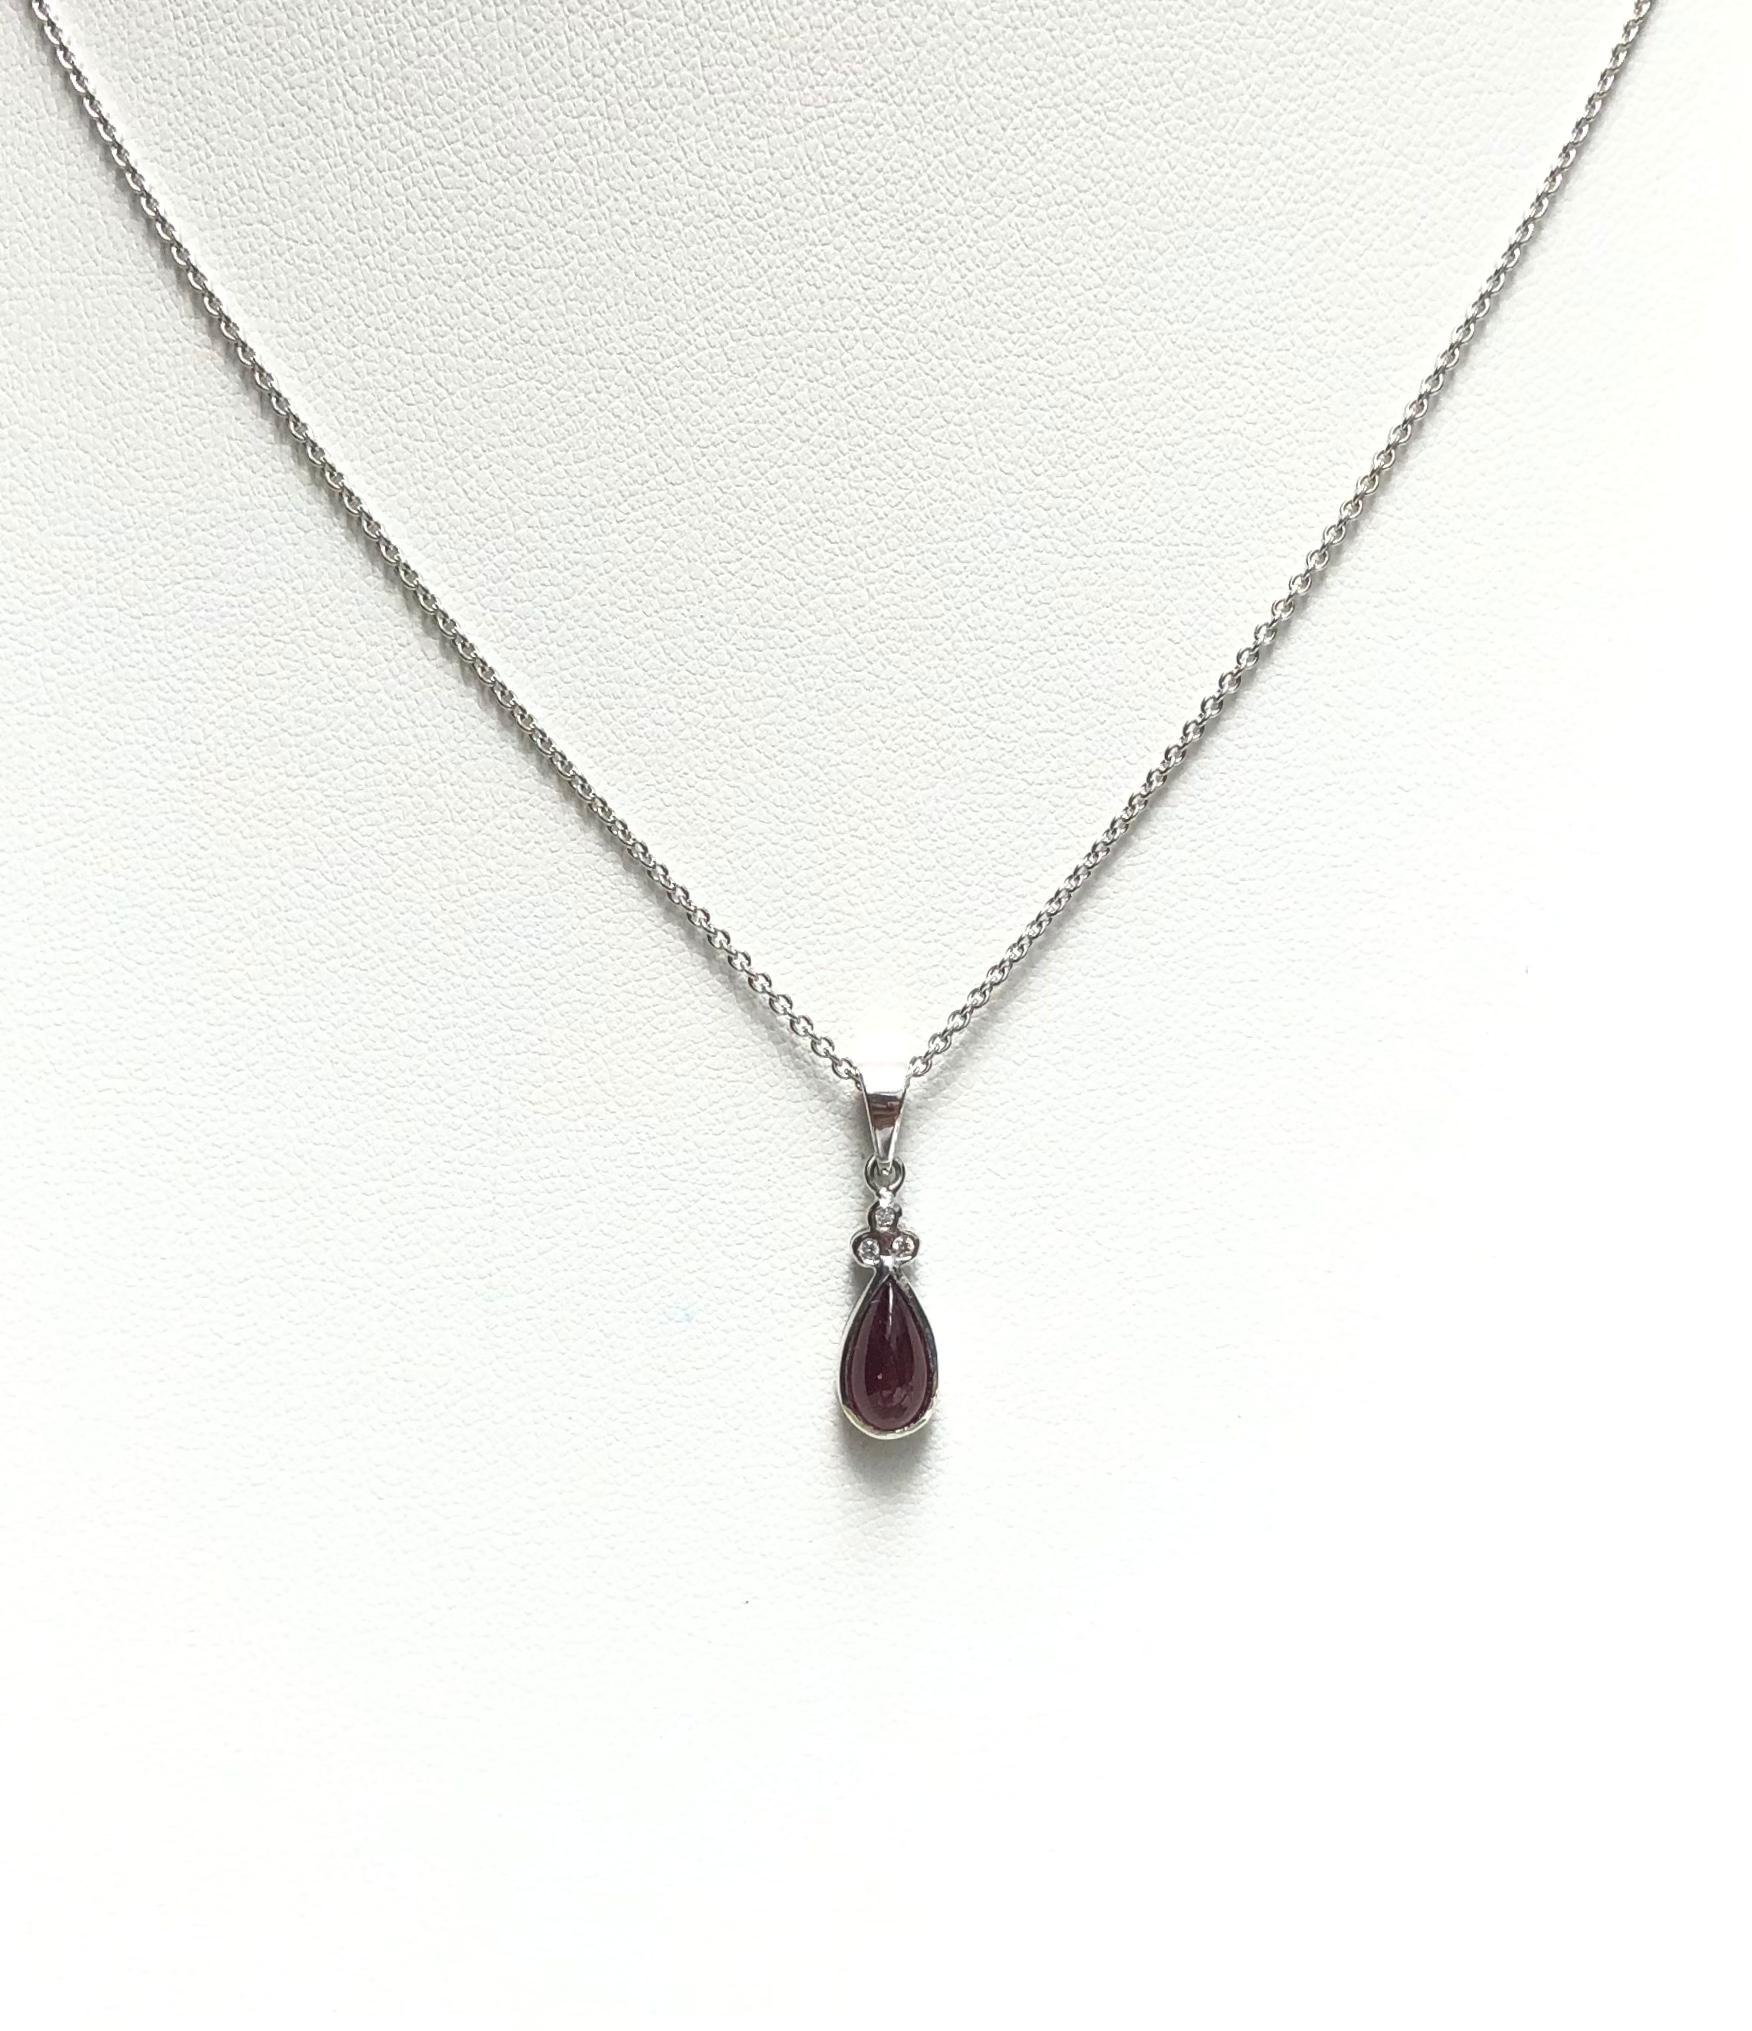 Cabochon Ruby 1.59 carats with Diamond  0.03 carat Pendant set in 18 Karat White Gold Settings
(chain not included)

Width:  0.6 cm 
Length: 2.1 cm
Total Weight: 1.46 grams

